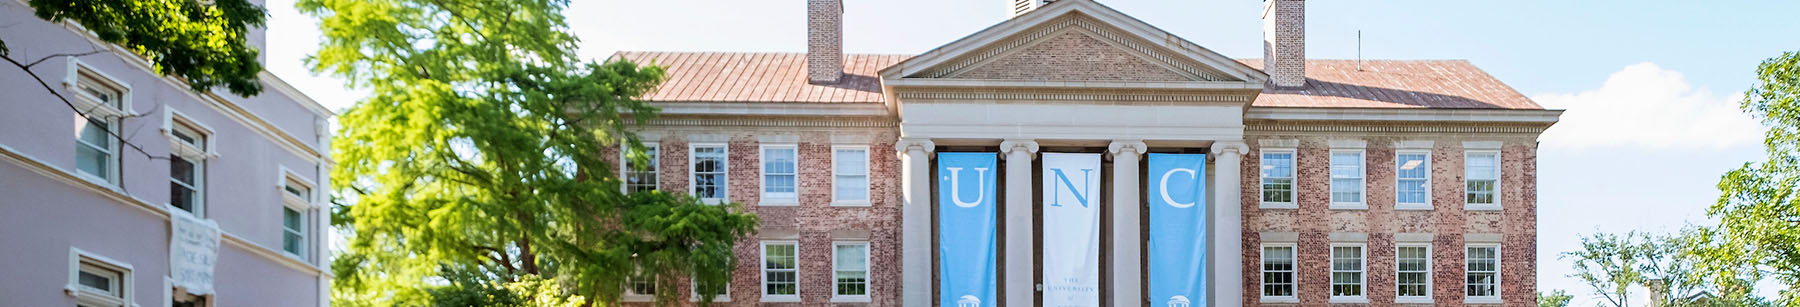 View of the South Building with UNC banners